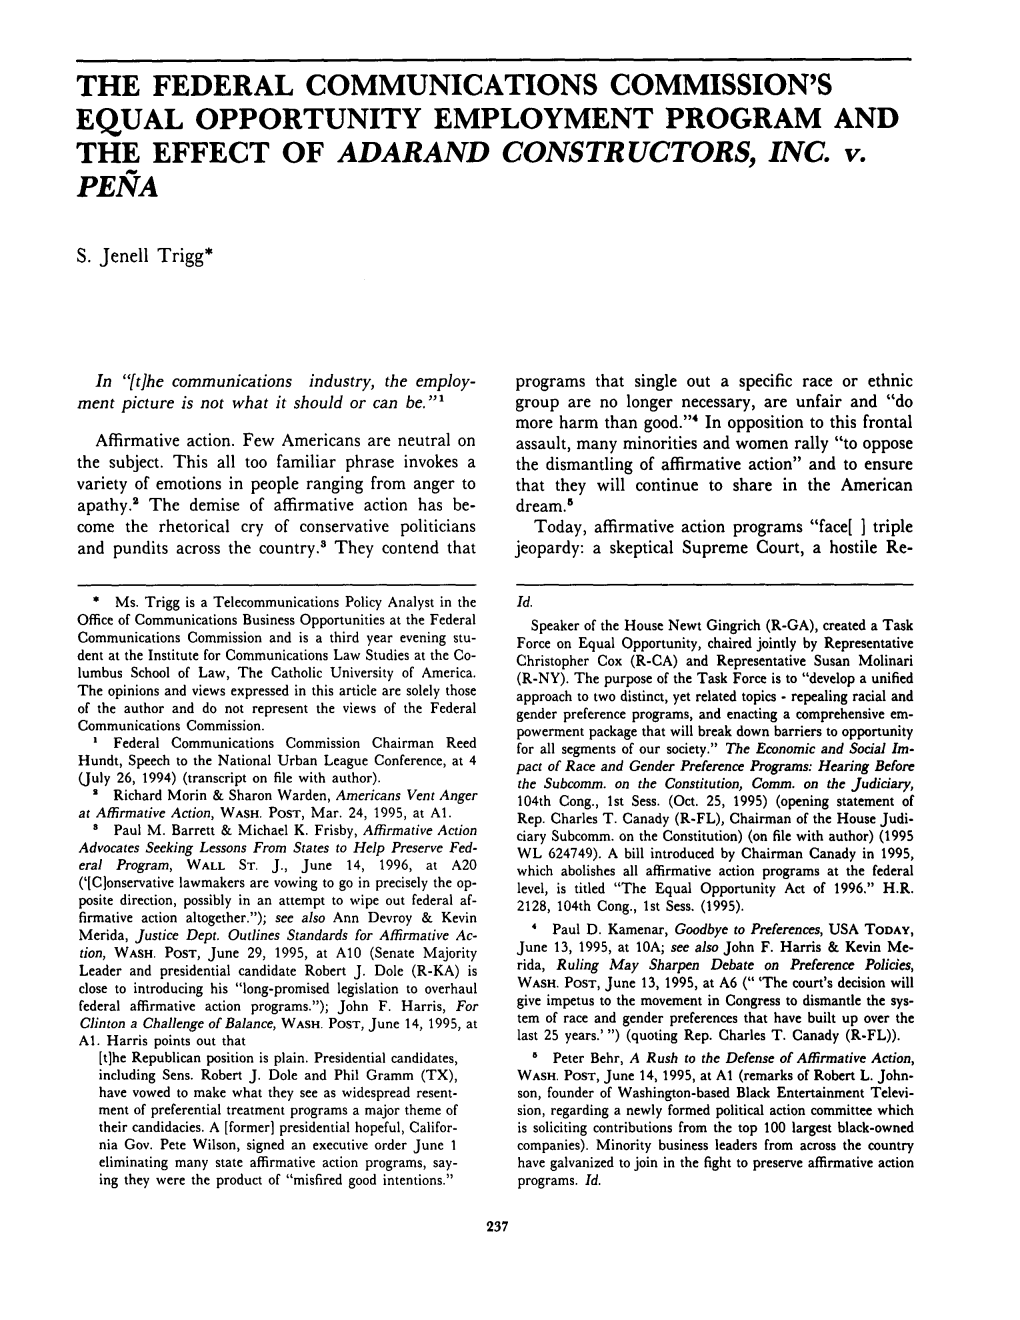 The Federal Communications Commission's Equal Opportunity Employment Program and the Effect of Adarand Constructors, Inc